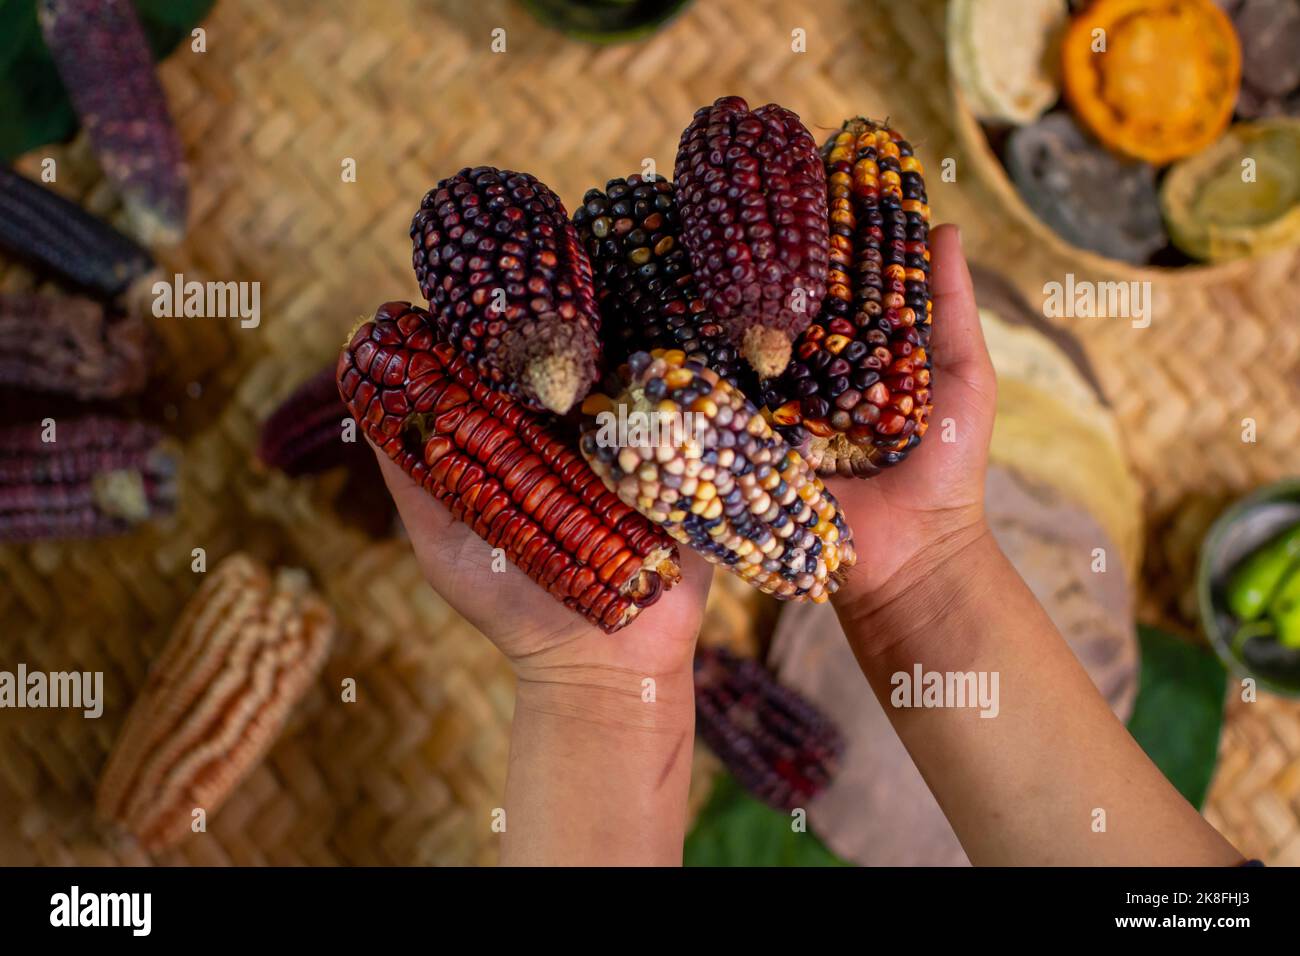 Hands of person holding bunch of Mexican corn cobs Stock Photo